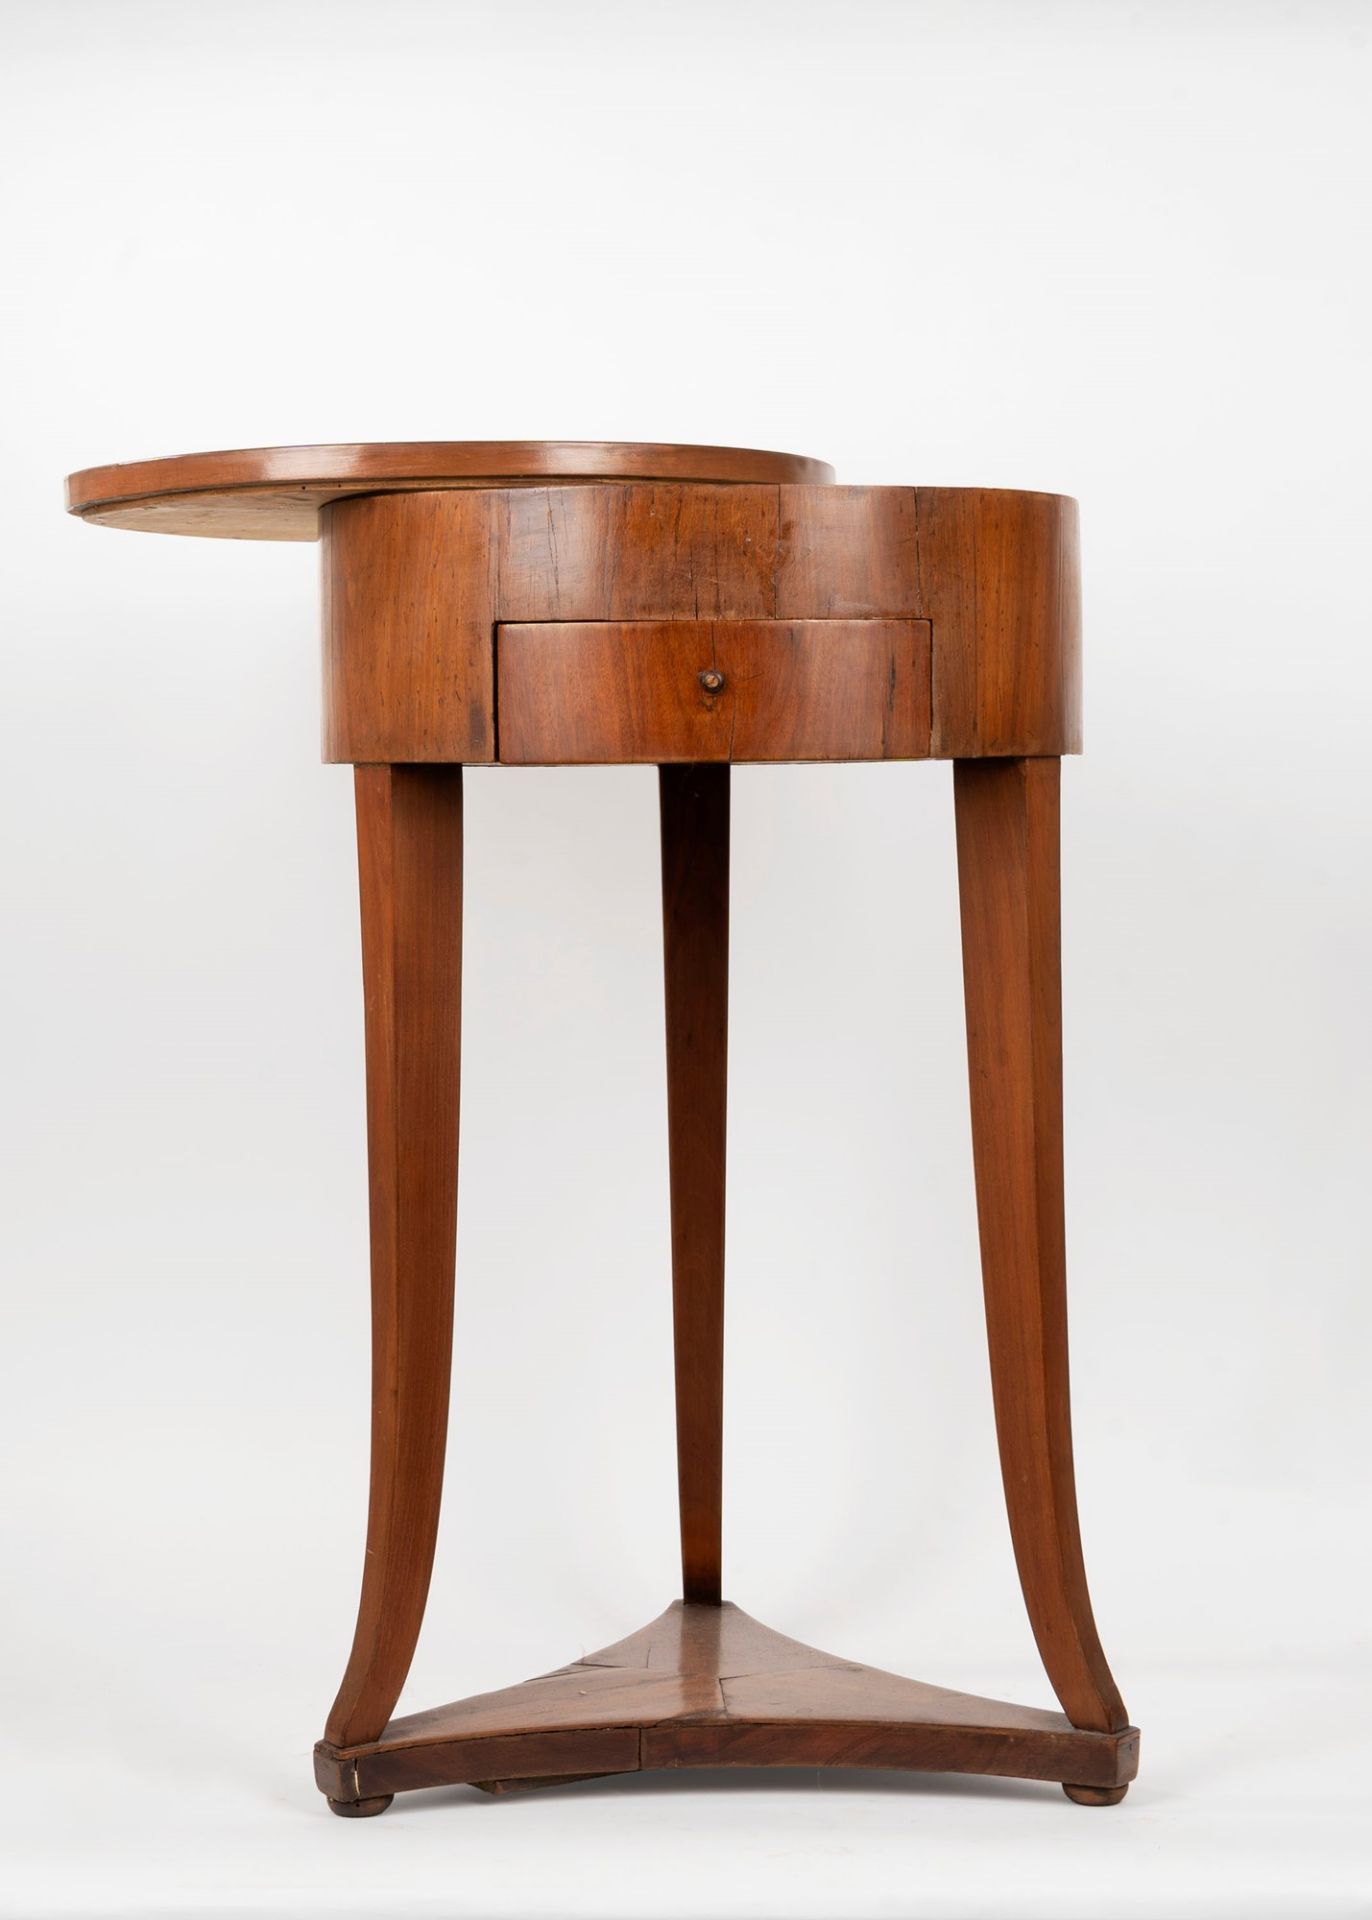 Round wooden work table with tourning top and drawer, 19th century